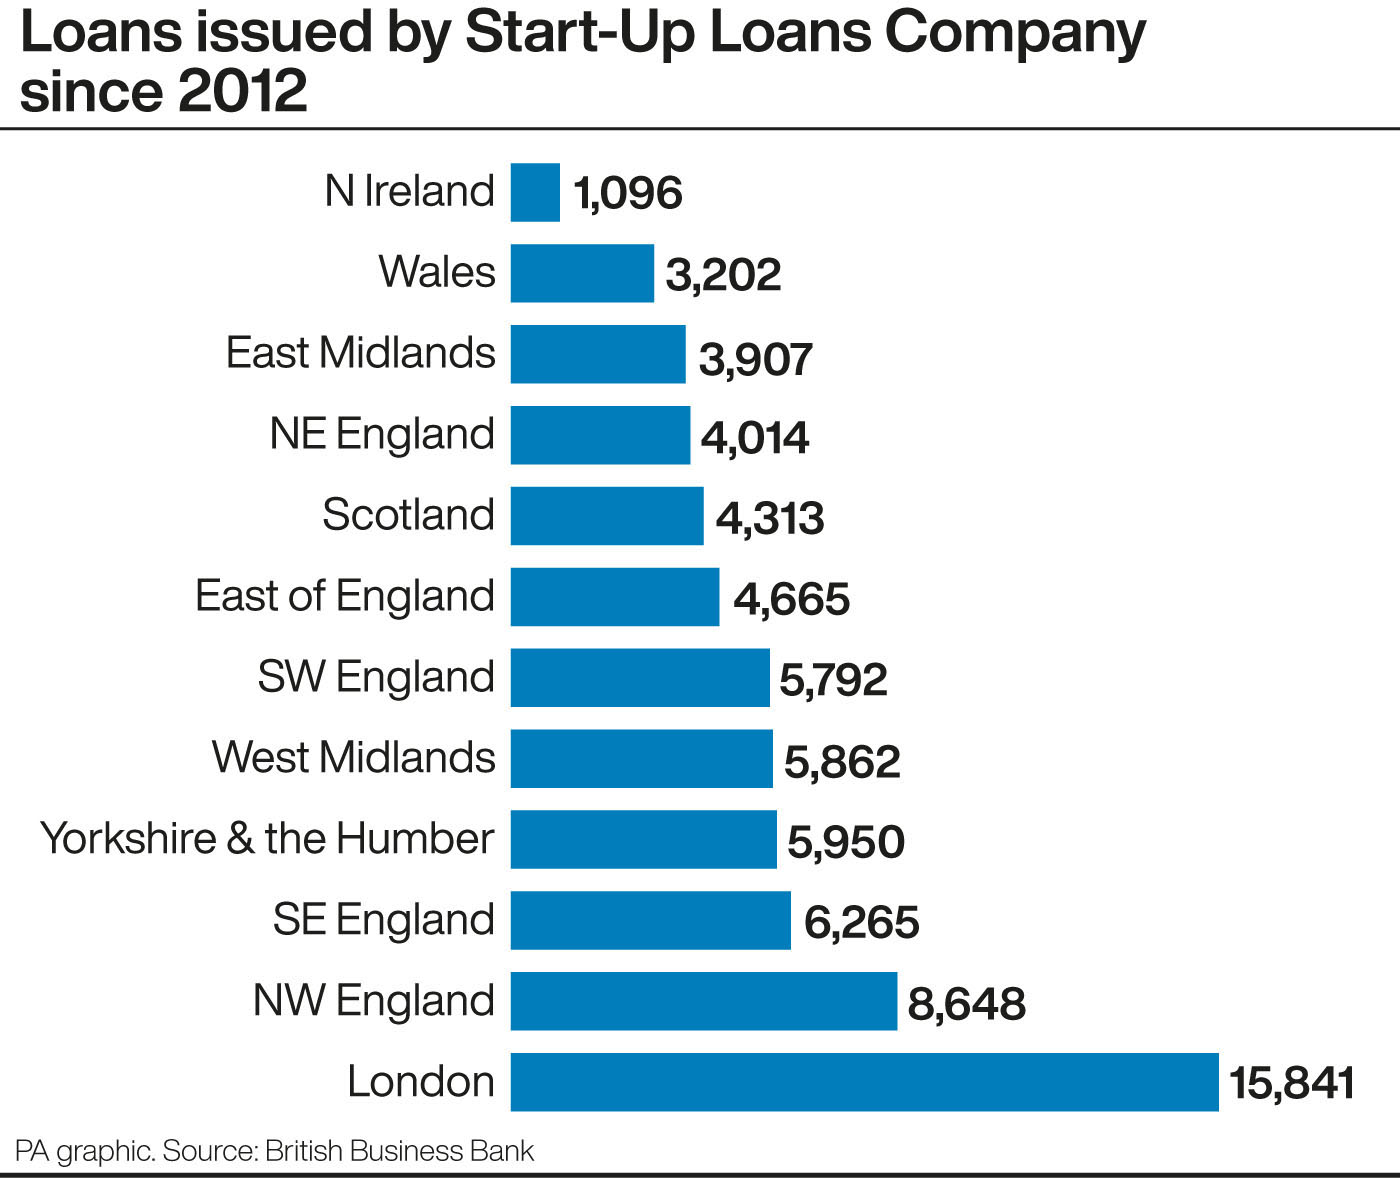 Loans issued by Start-Up Loans Company since 2012